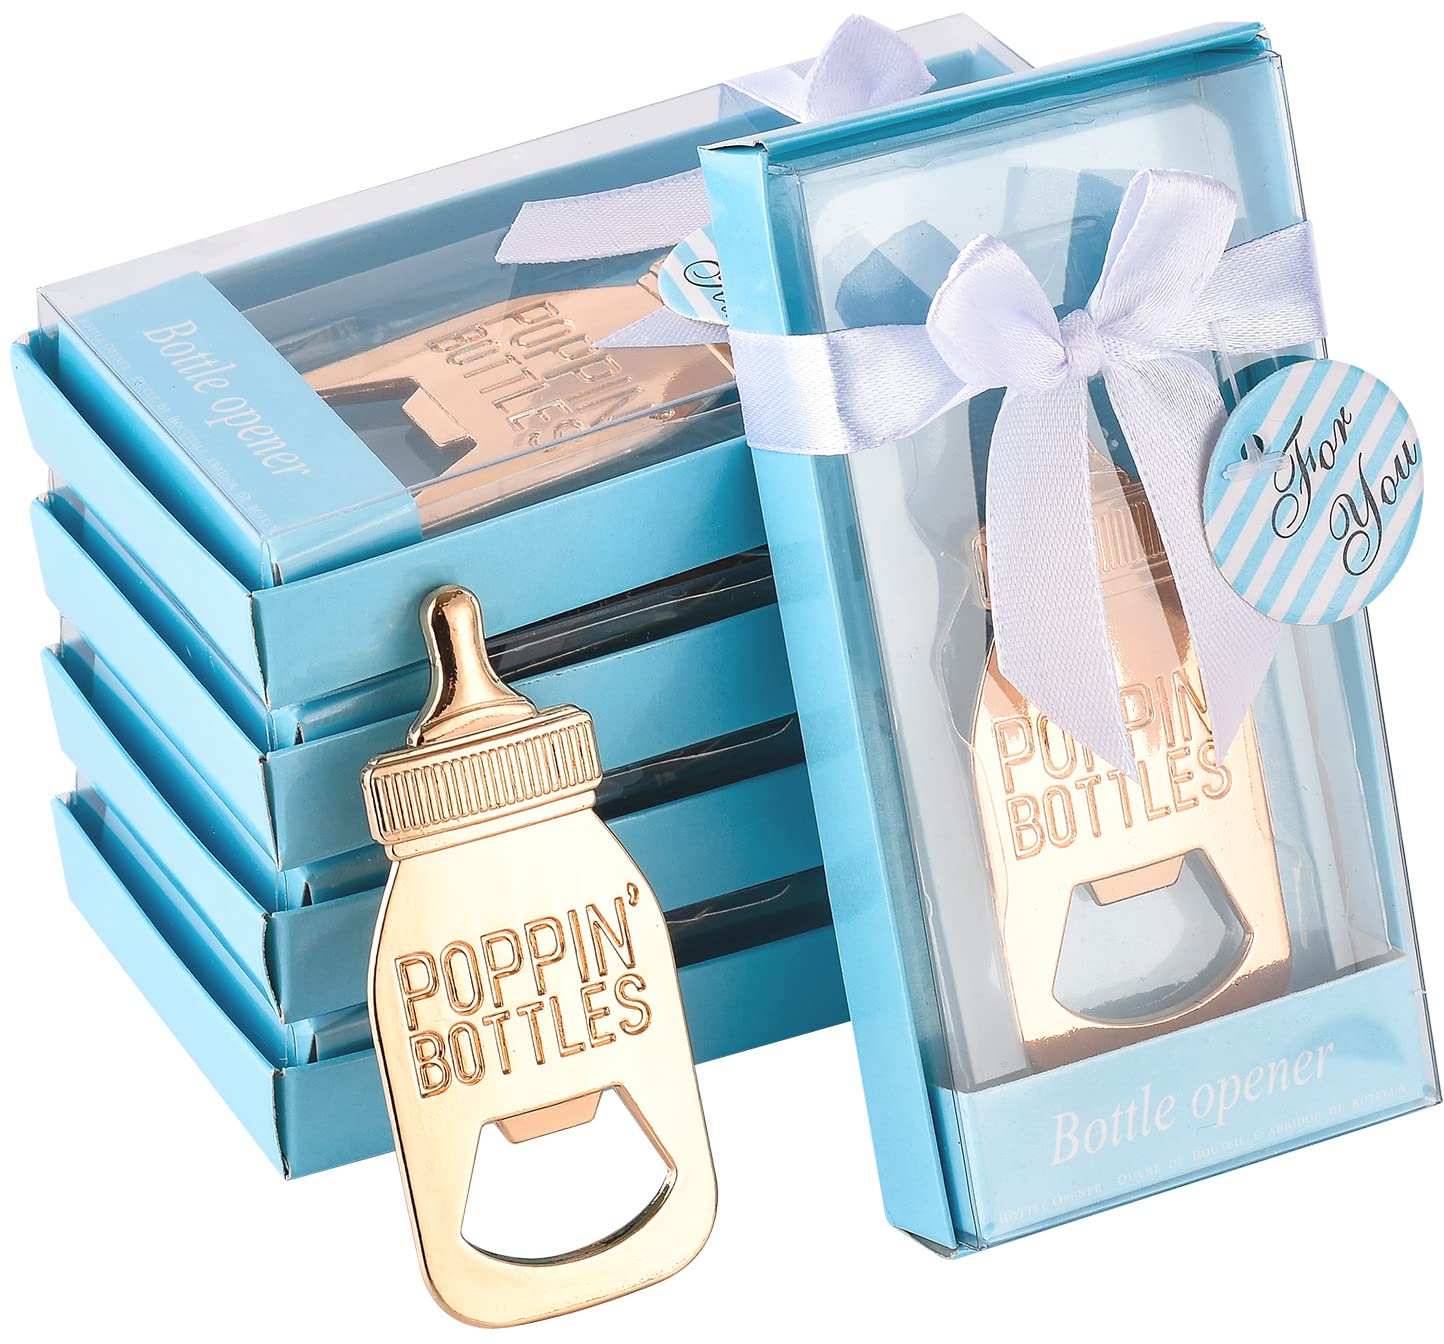 24 pcs Baby Shower Return Gifts for Guest Supplies Poppin Baby Bottle Shaped Bottle Opener Wedding Favor with Exquisite Packaging Party Souvenirs Gift Decorations by WeddParty (Blue 24pcs)